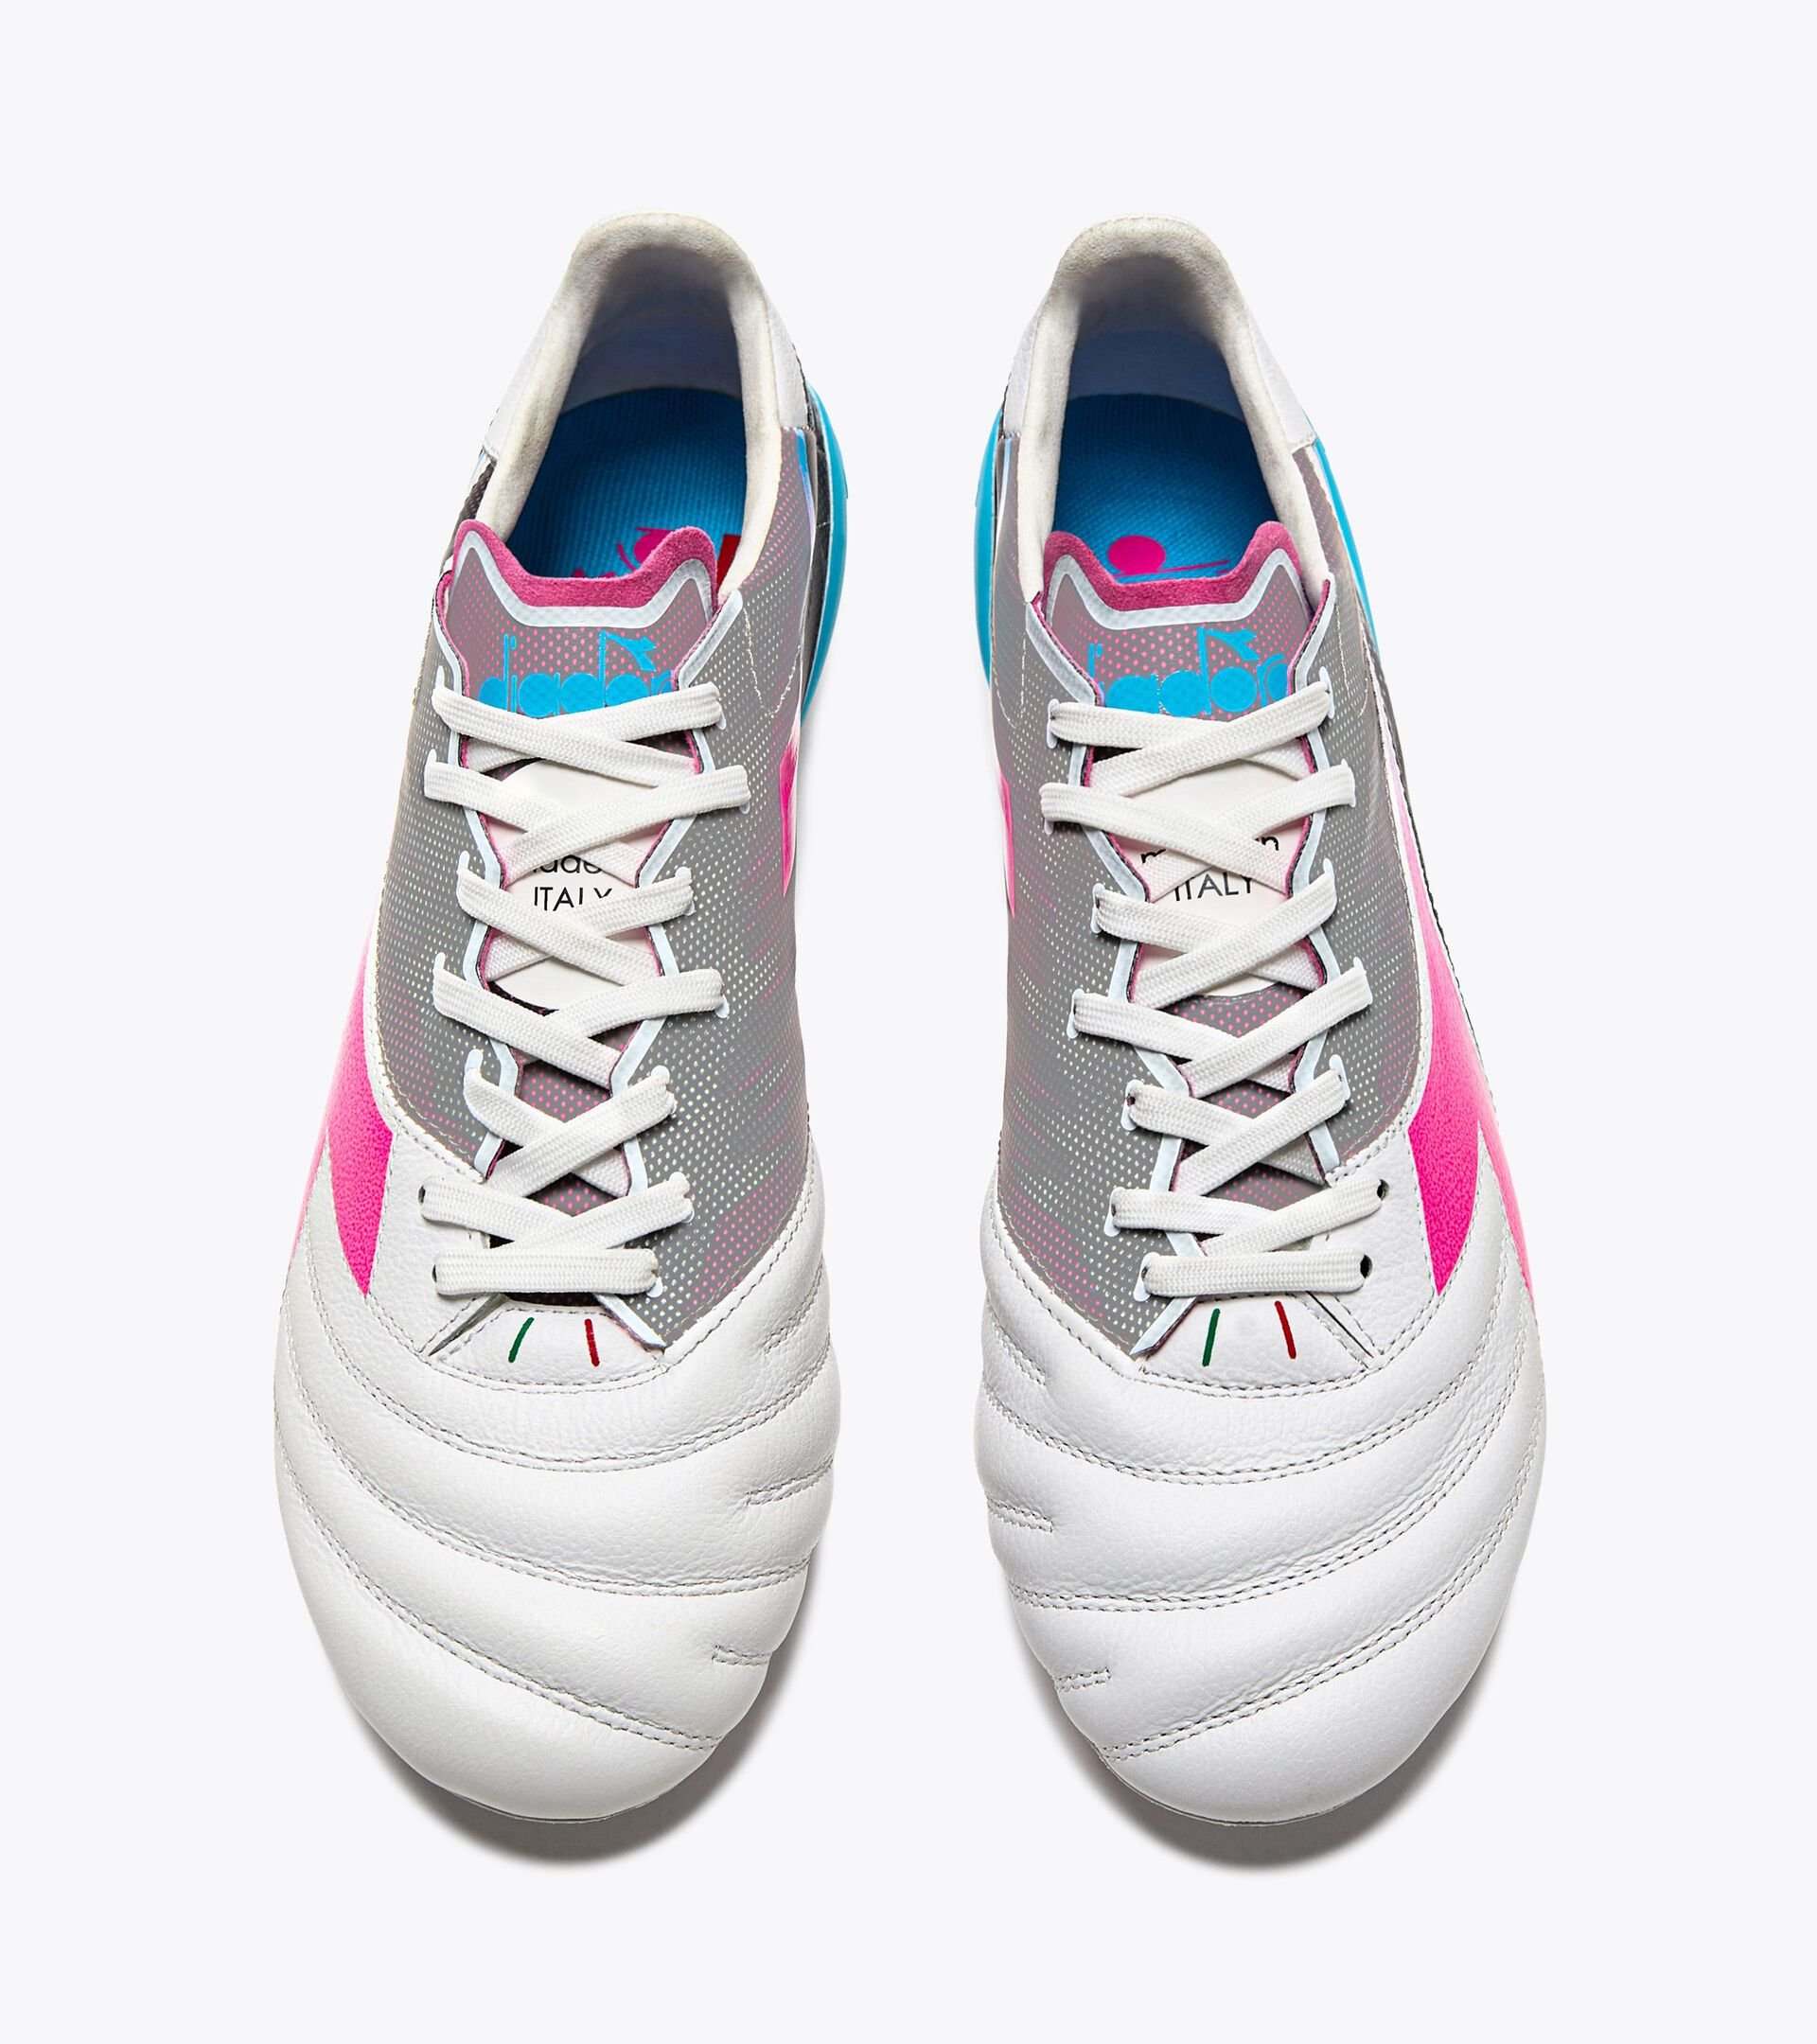 Calcio boots for firm grounds - Made in Italy - Gender Neutral BRASIL ELITE VELOCE GR ITA LPX WHT/PINK FLUO/BLUE FLUO - Diadora